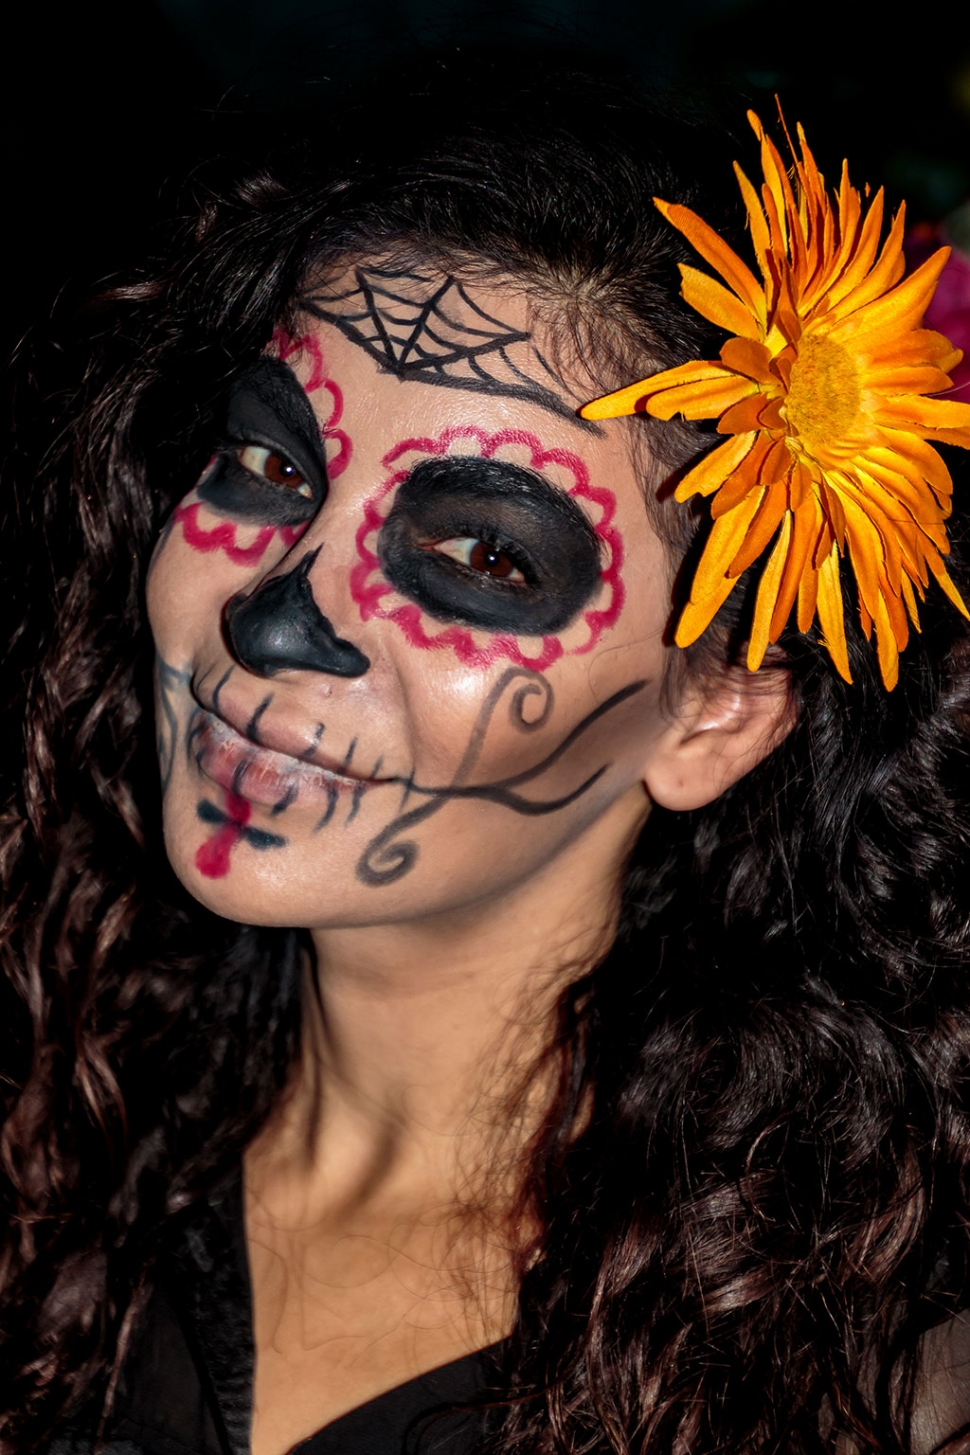 Photo of the Week "The lady, her face artfully painted, recently celebrated Dia De Los Muertos in Fillmore" By Bob Crum. Photo details: Canon 7D MKII camera in manual mode, ISO 400, Tamron 16-300mm lens @63mm, aperture f/5.0, shutter speed 1/60 seconds.